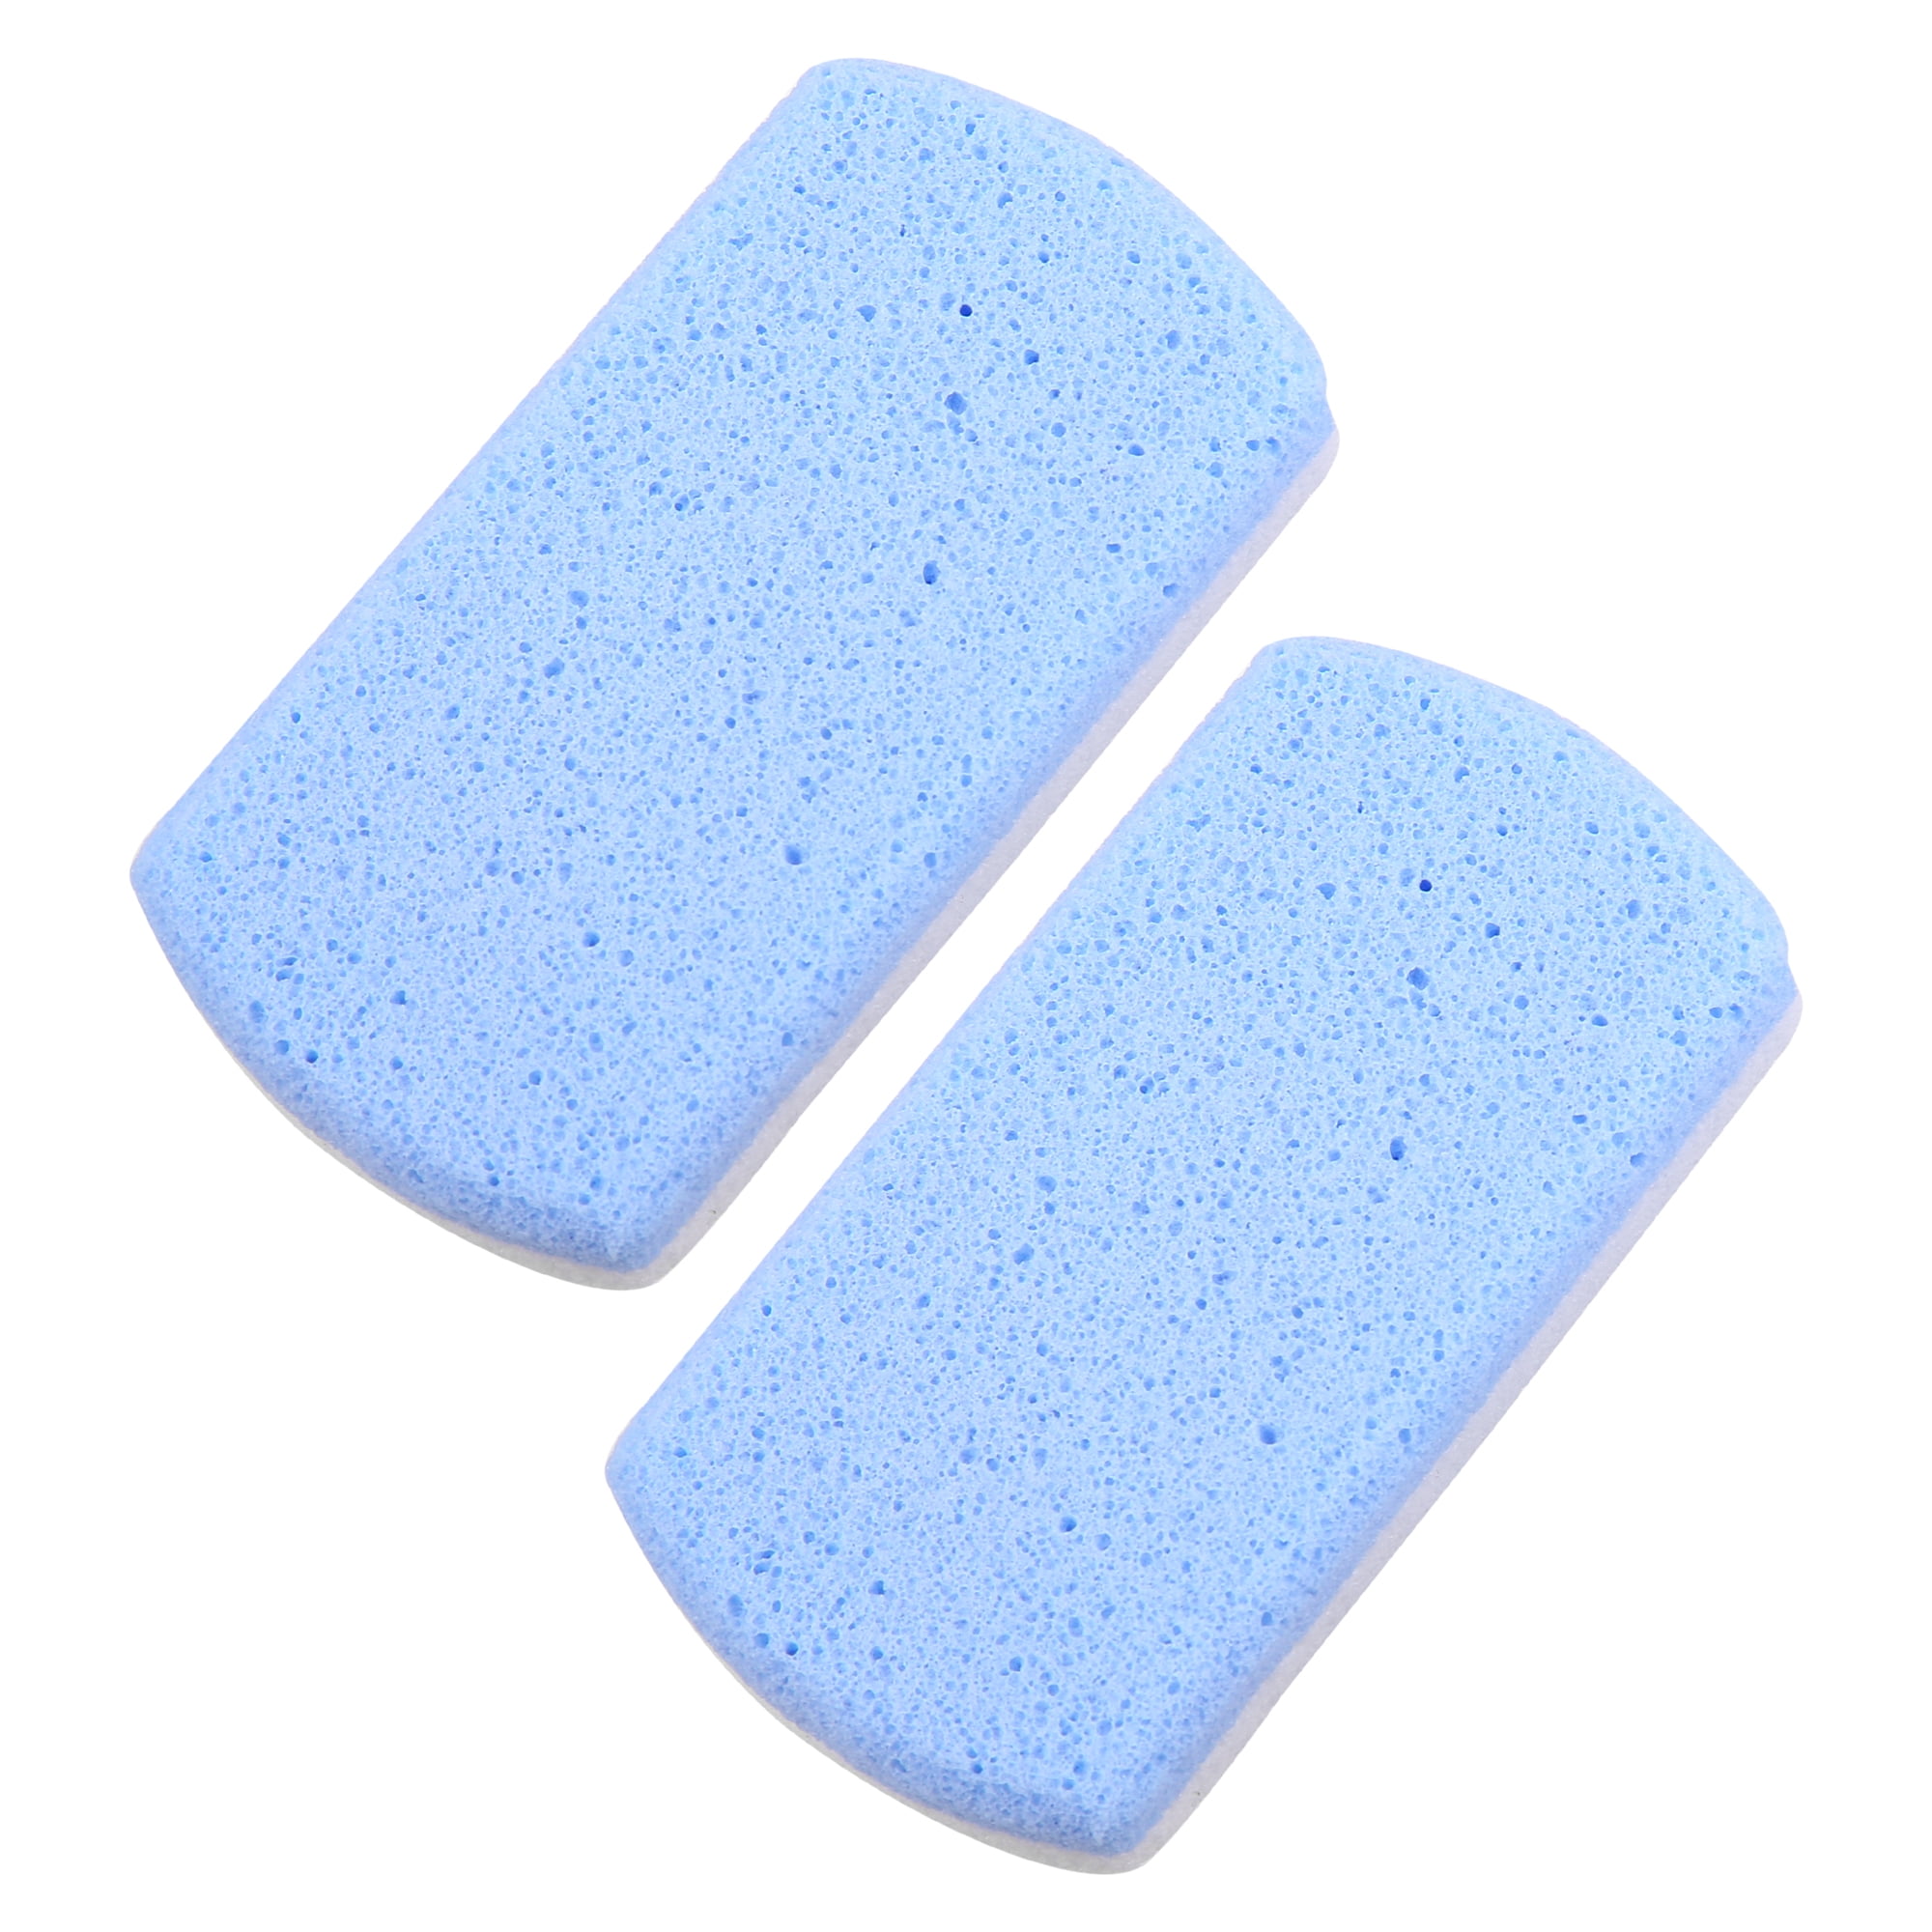 Unique Bargains Foot File Exfoliating Scrub Stone Double Sided Fine and  Coarse Pumice Stone Foot Care 2 Pcs Blue